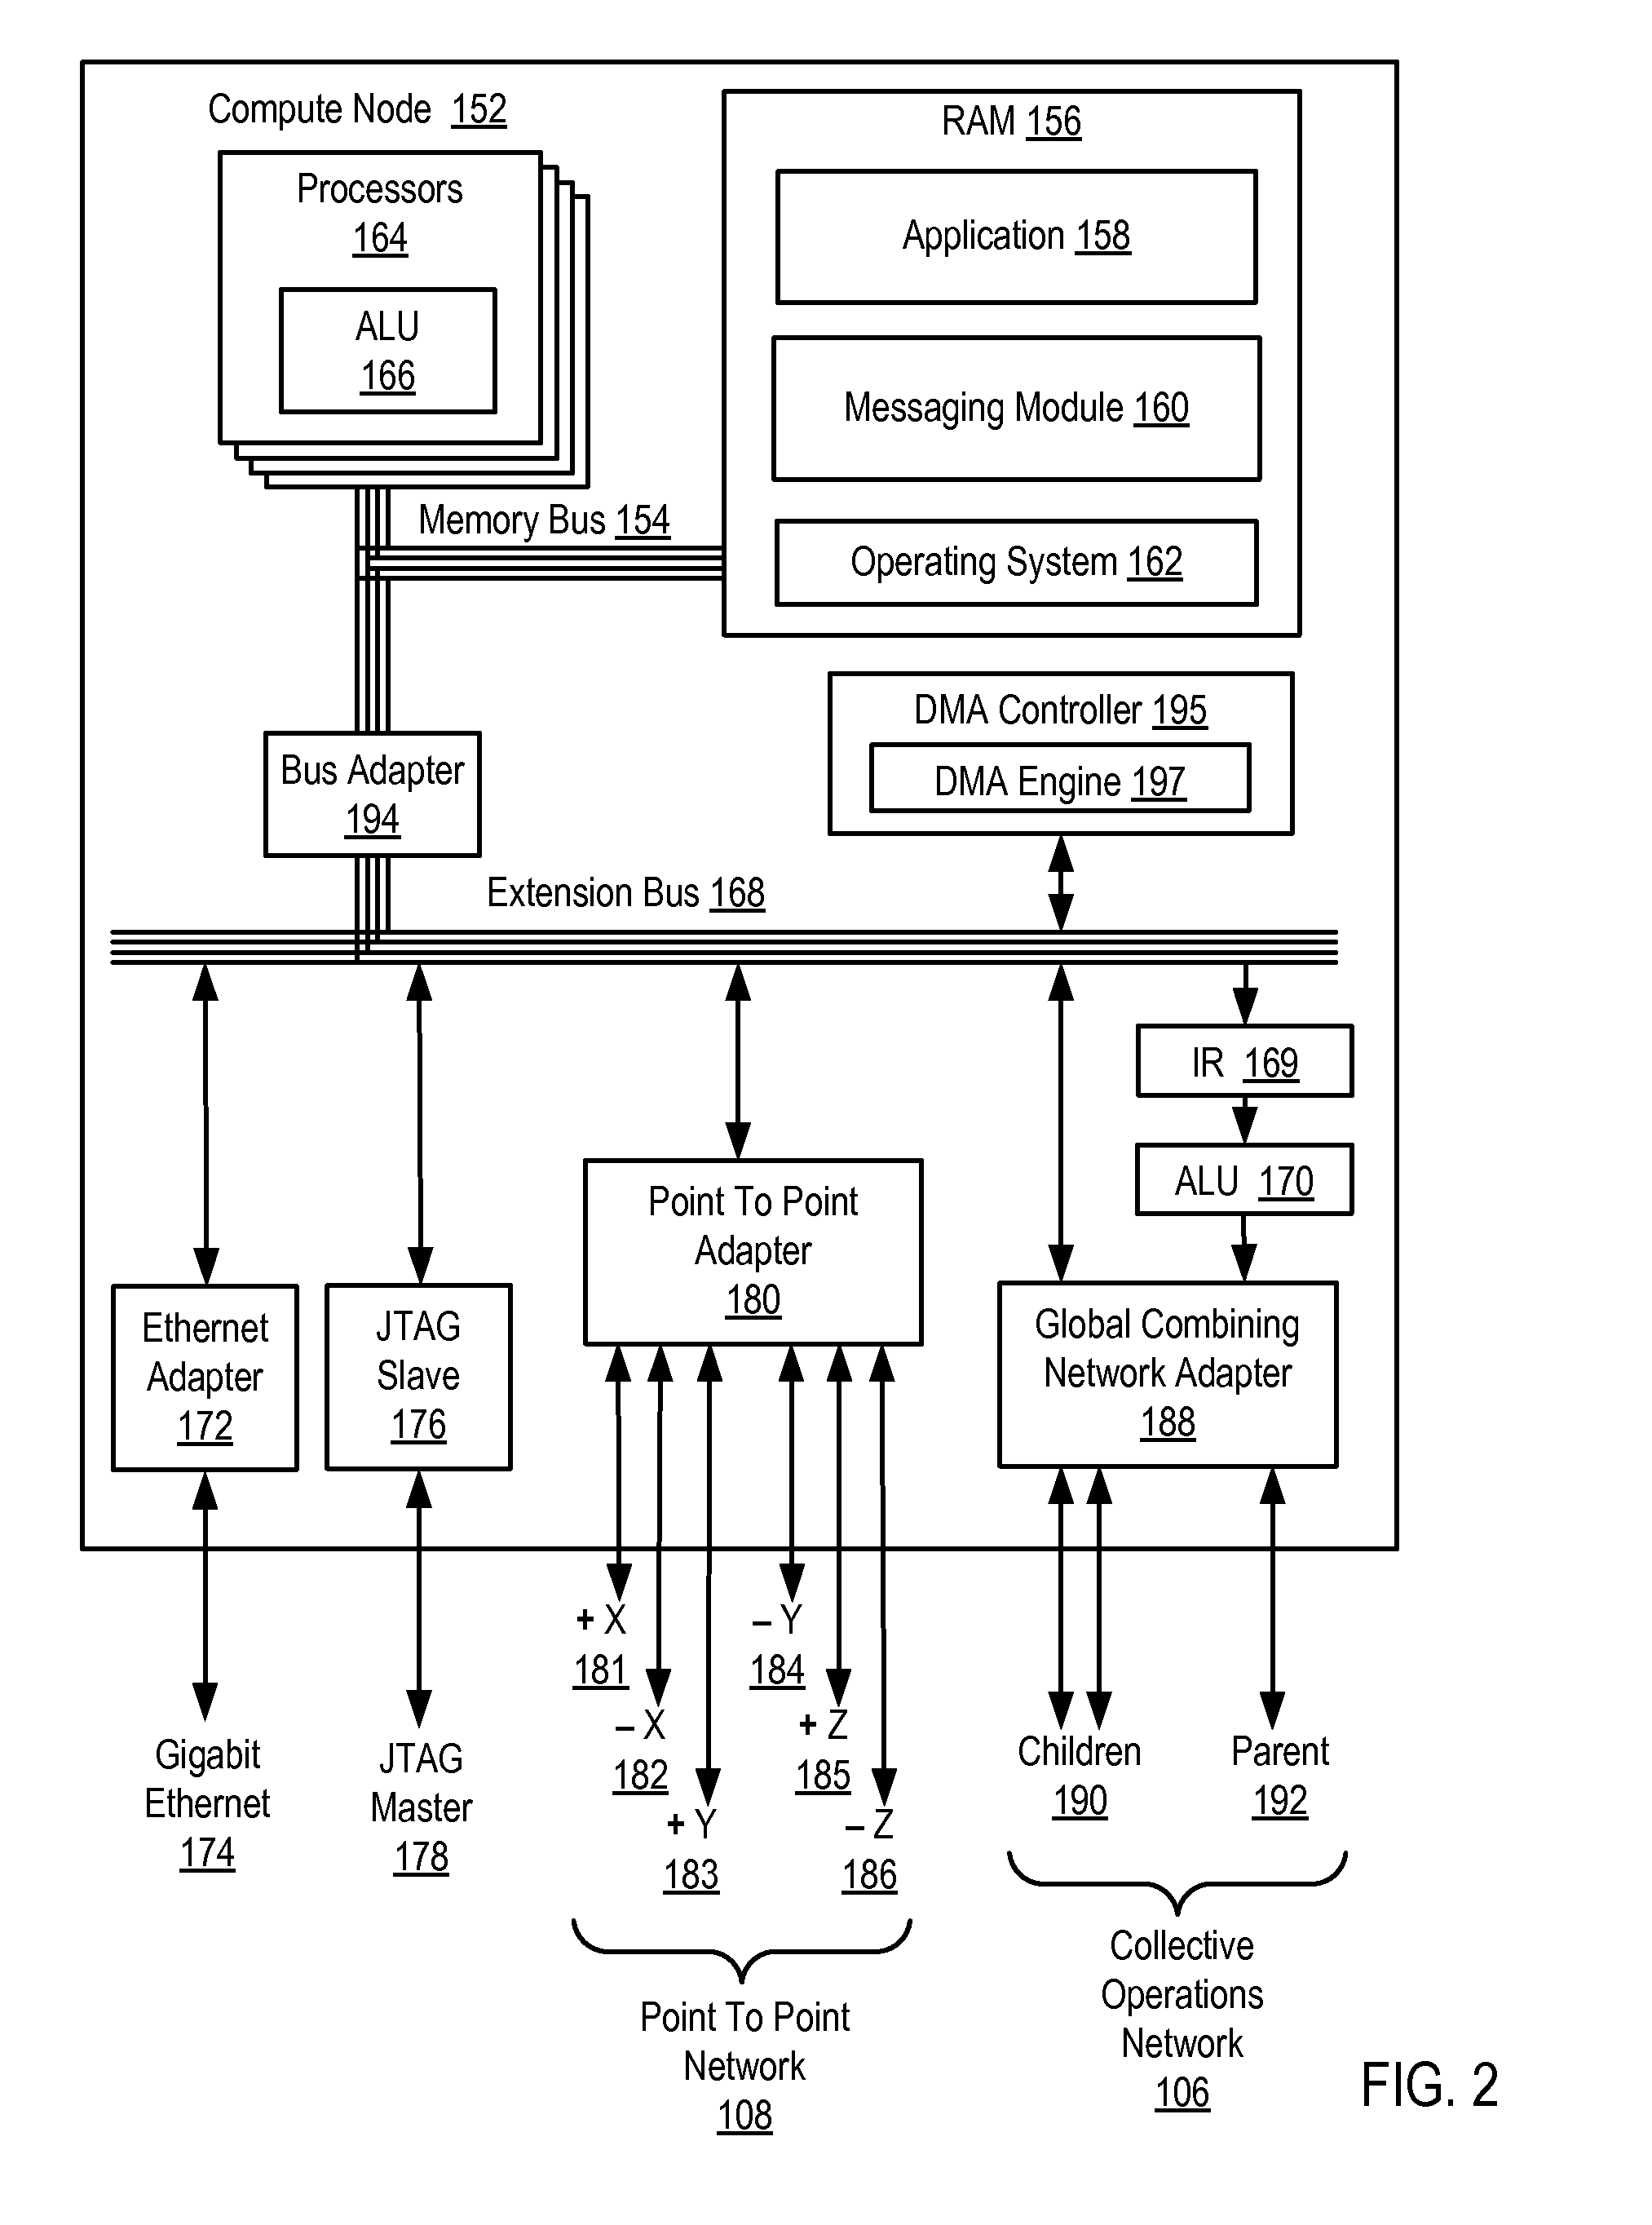 Broadcasting Collective Operation Contributions Throughout A Parallel Computer